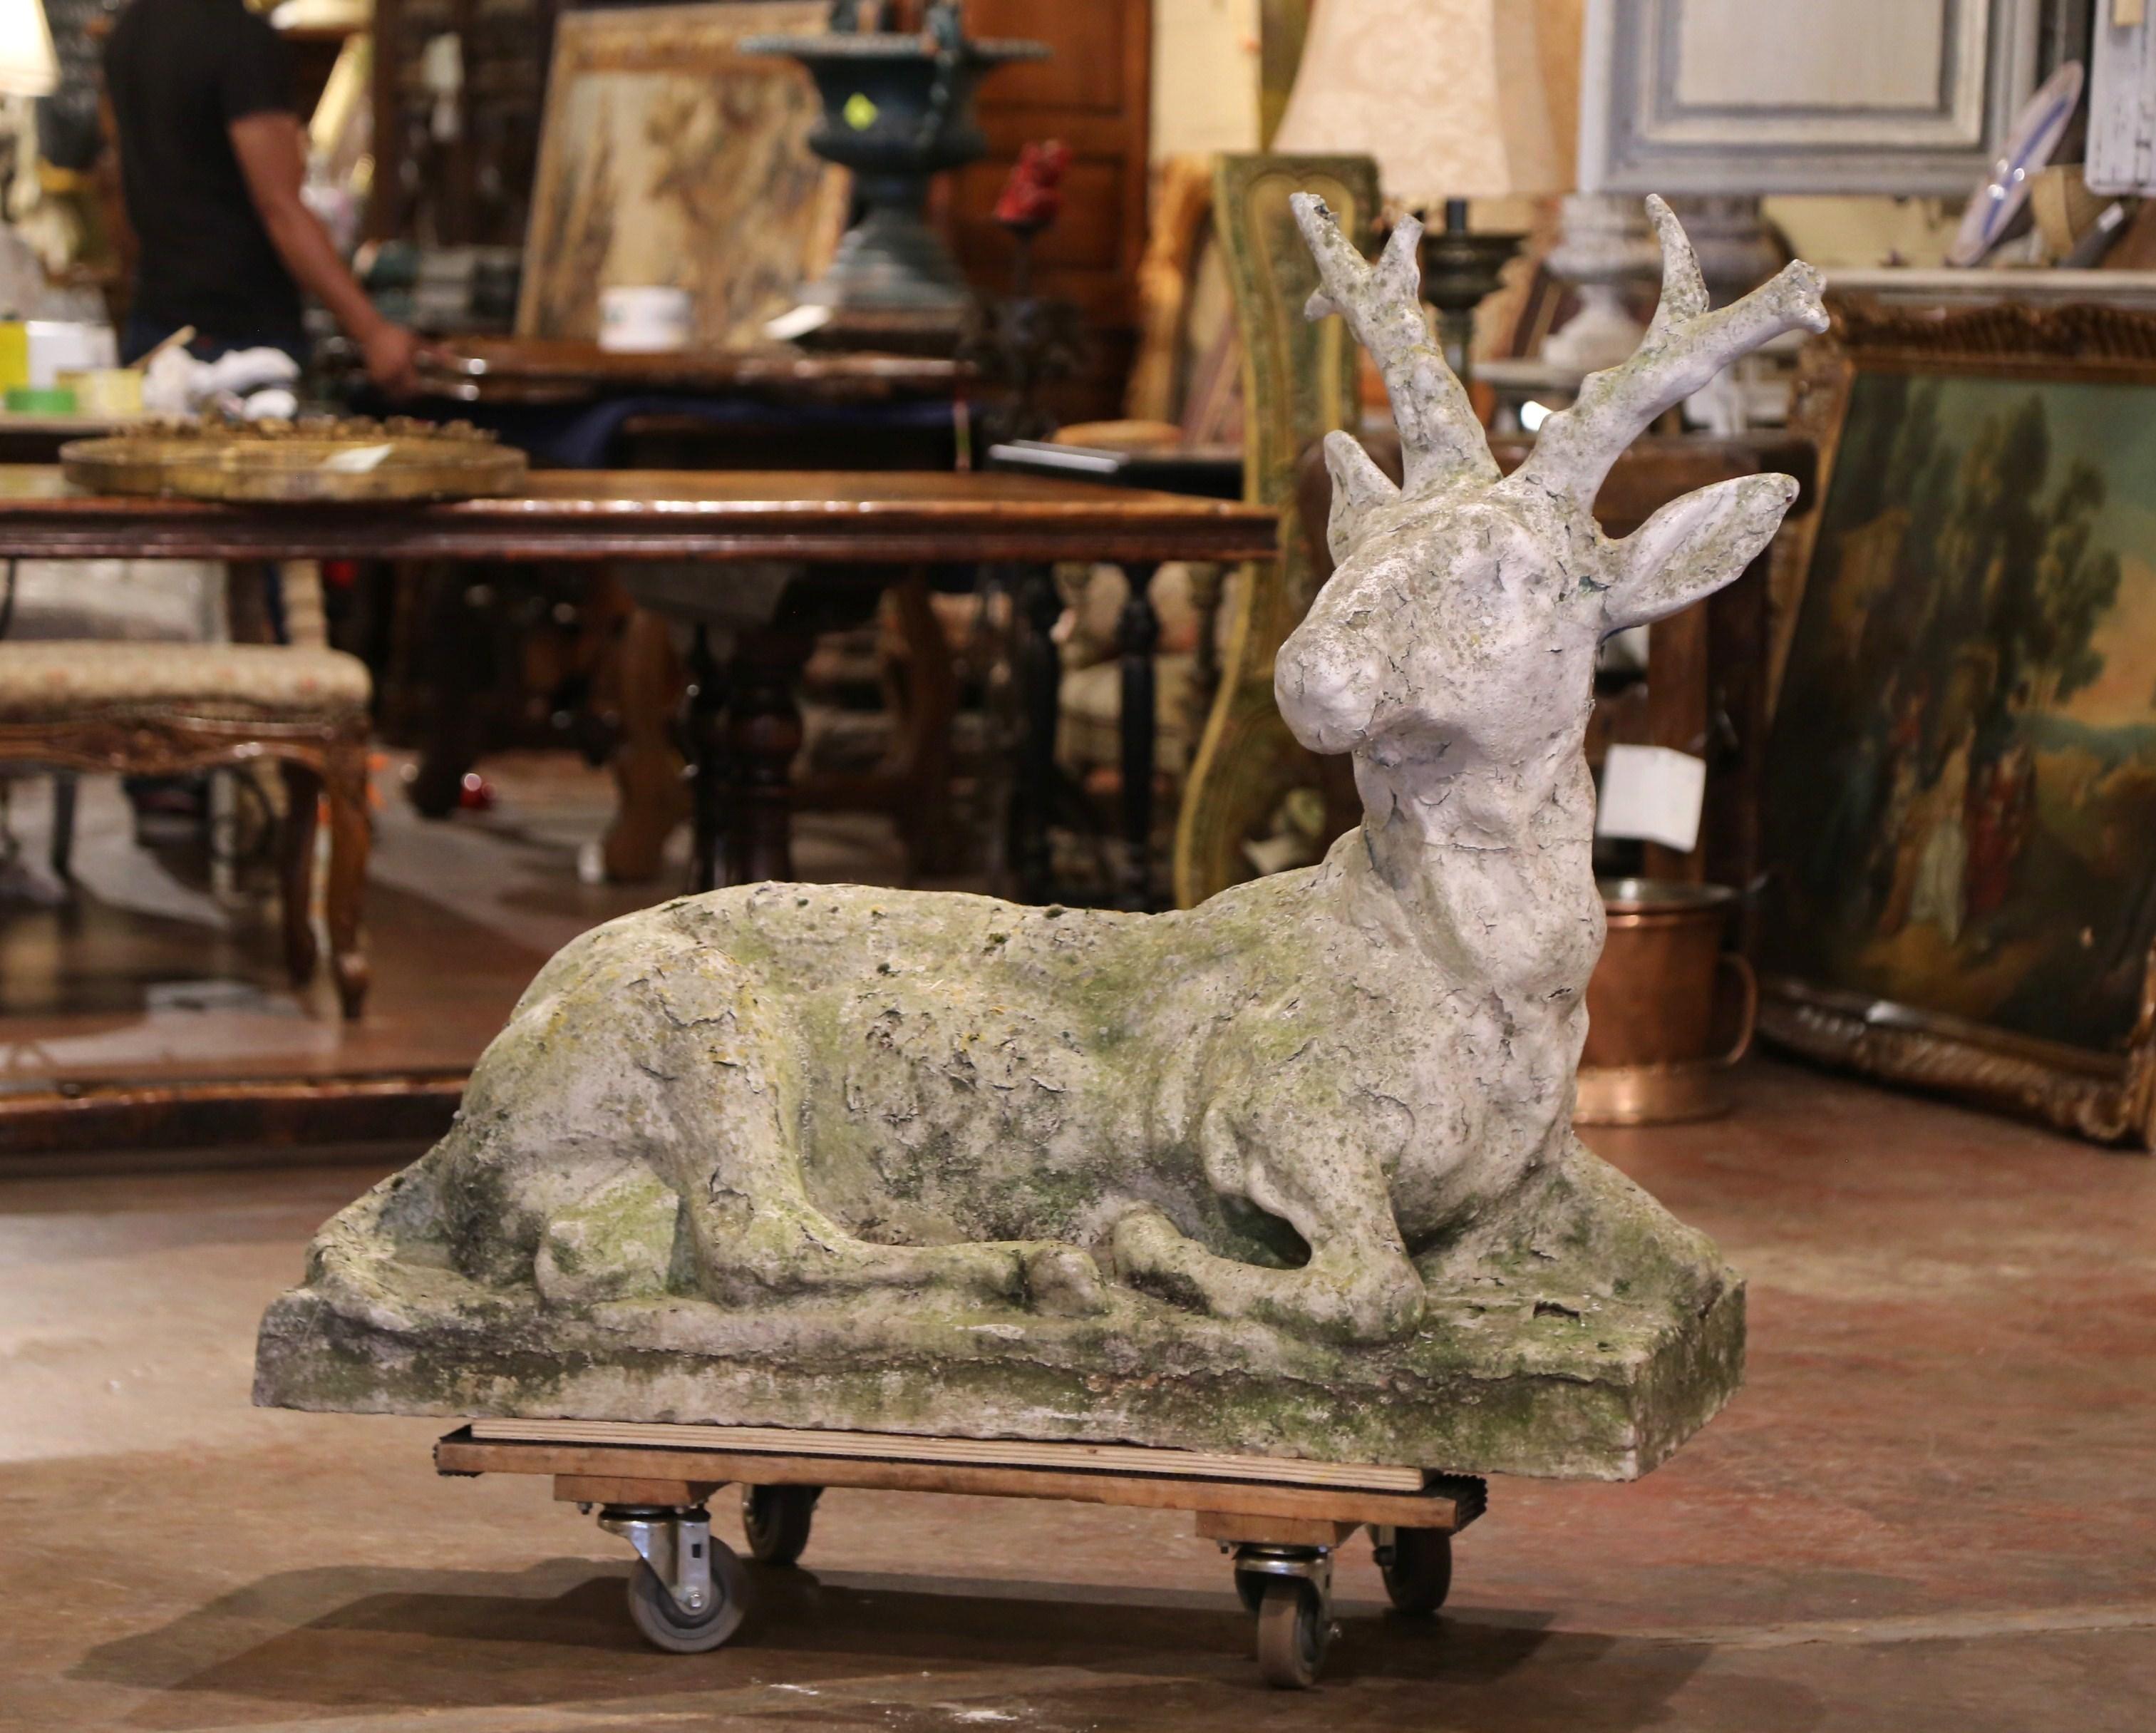 Decorate a garden with this important antique deer sculpture. Carved in northern France circa 1880 and set on a rectangular integral base, the large buck figure is featured lying down his head up. The elegant sculpture is in excellent condition